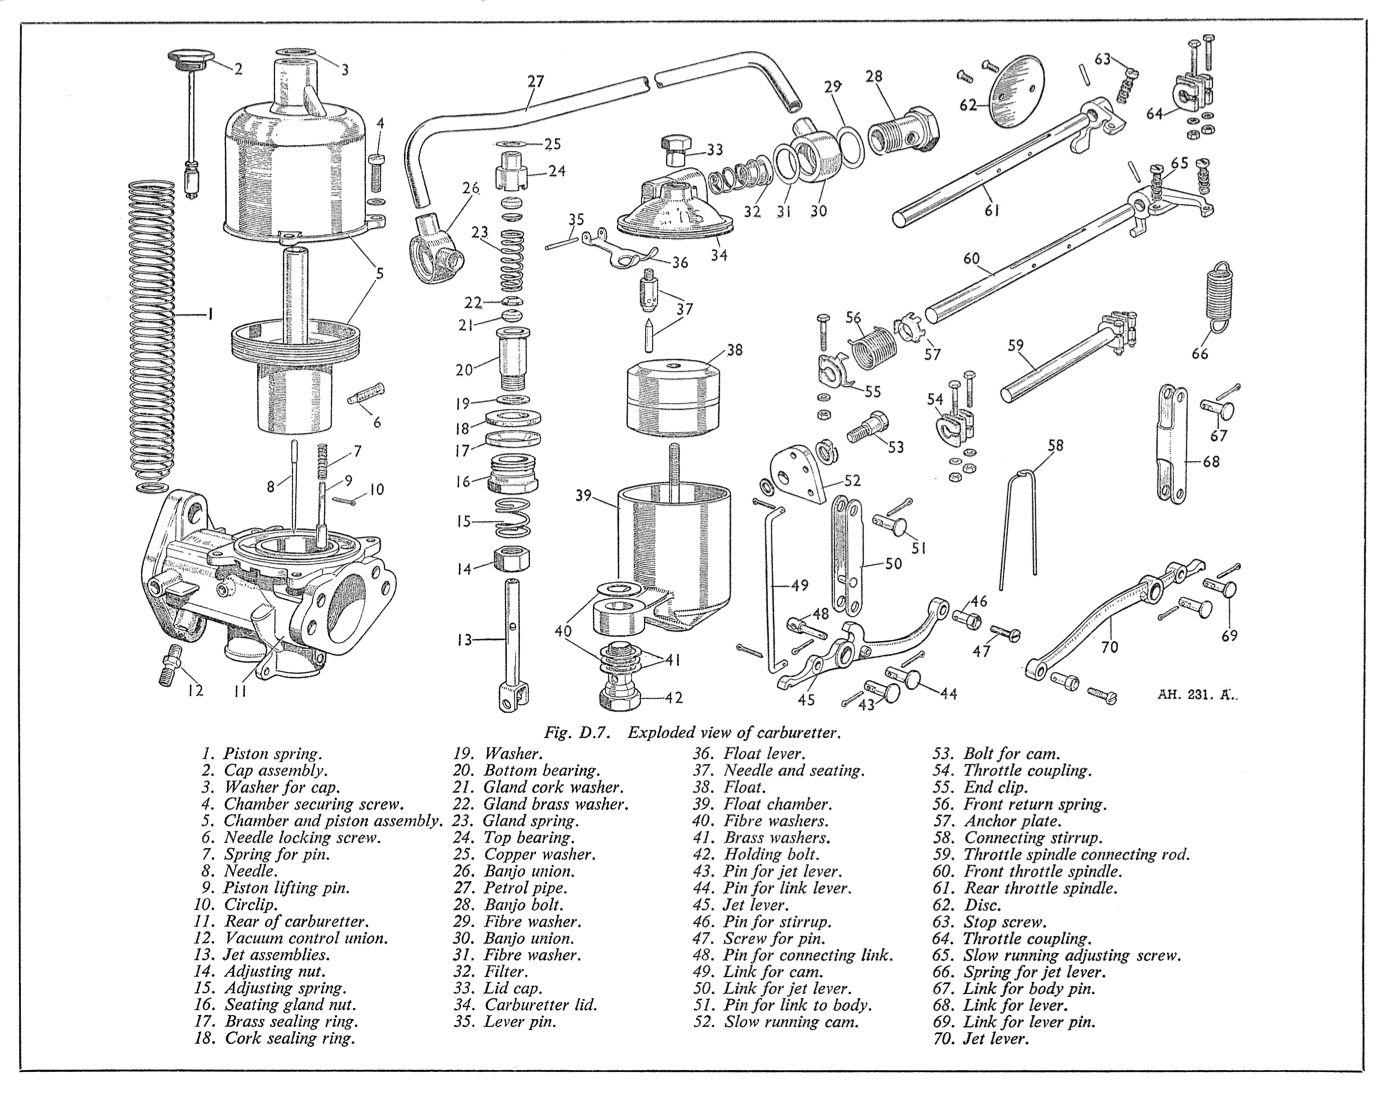 Fig D.7. Exploded view of carburetter.